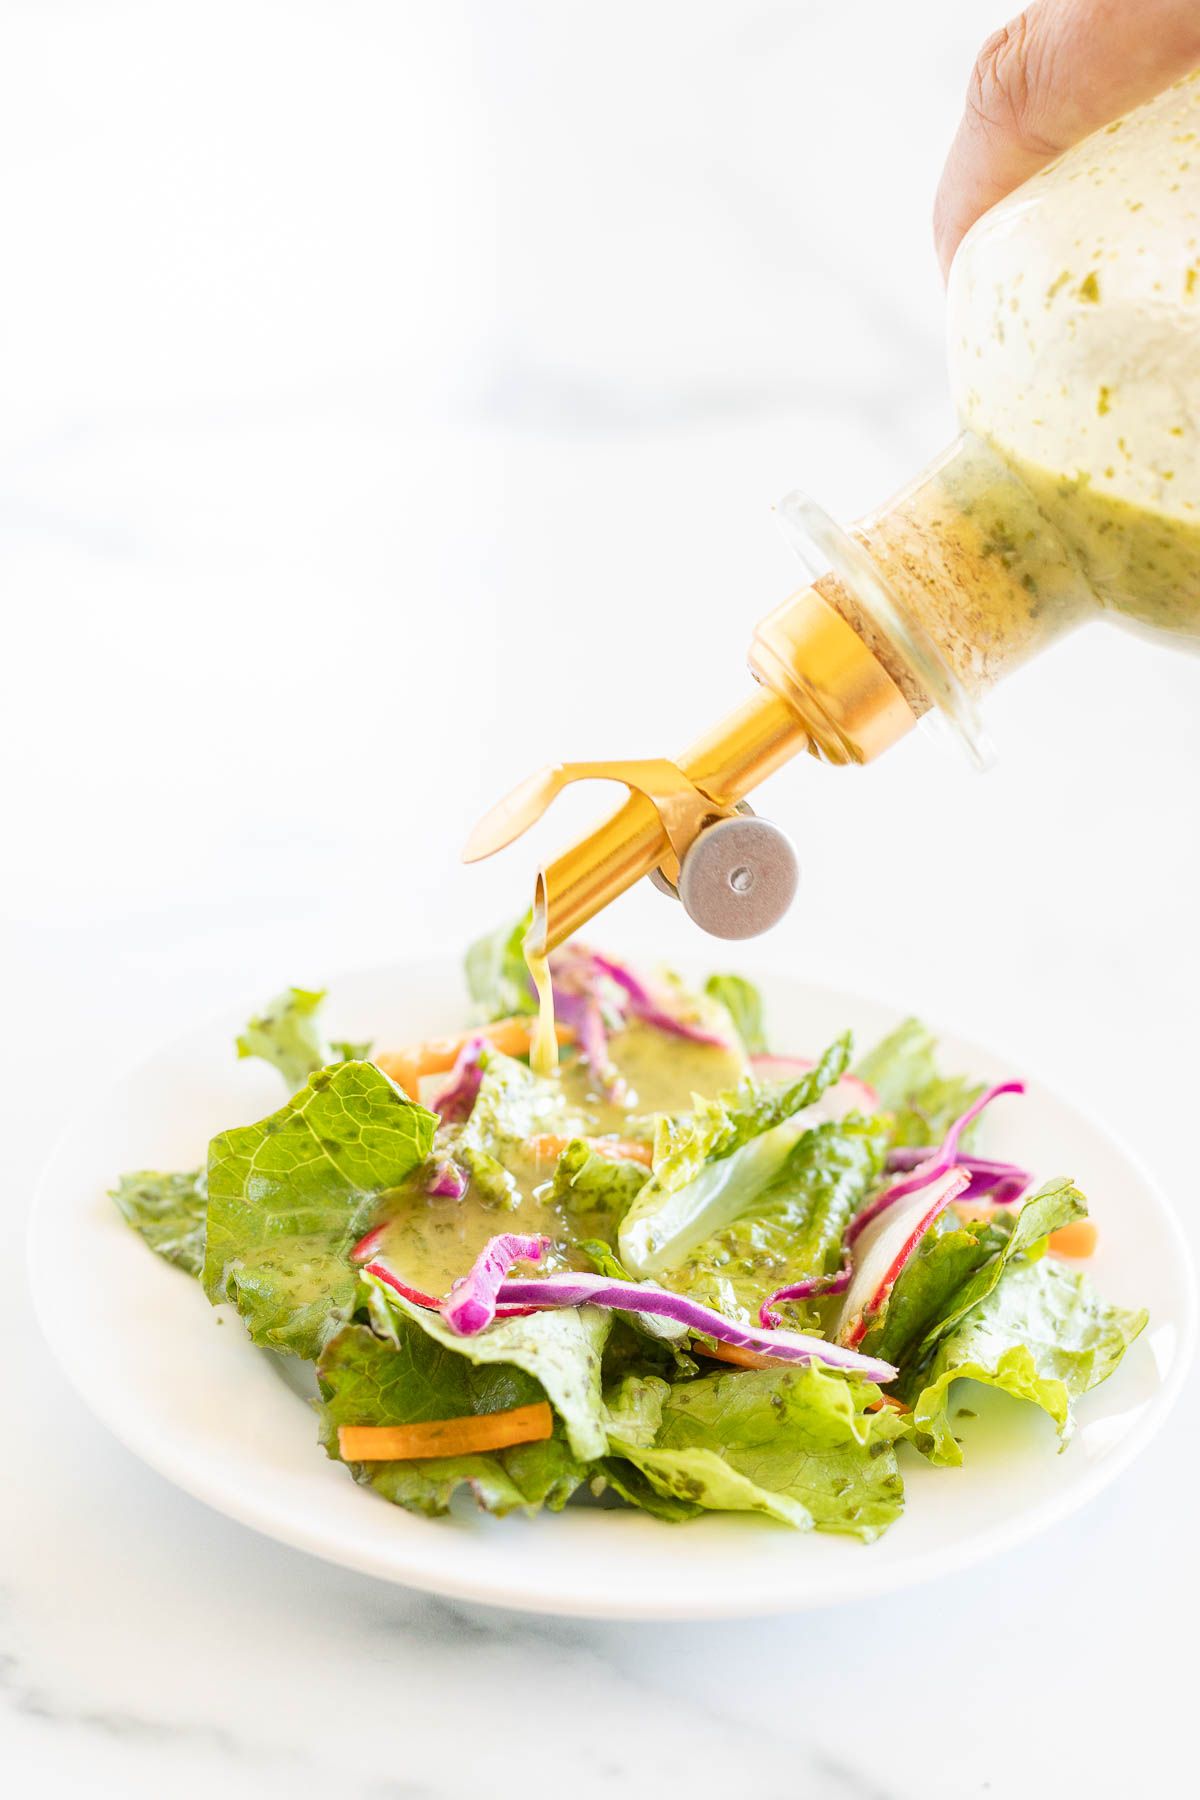 A glass bottle of cilantro lime dressing being poured over a green salad on a white plate.